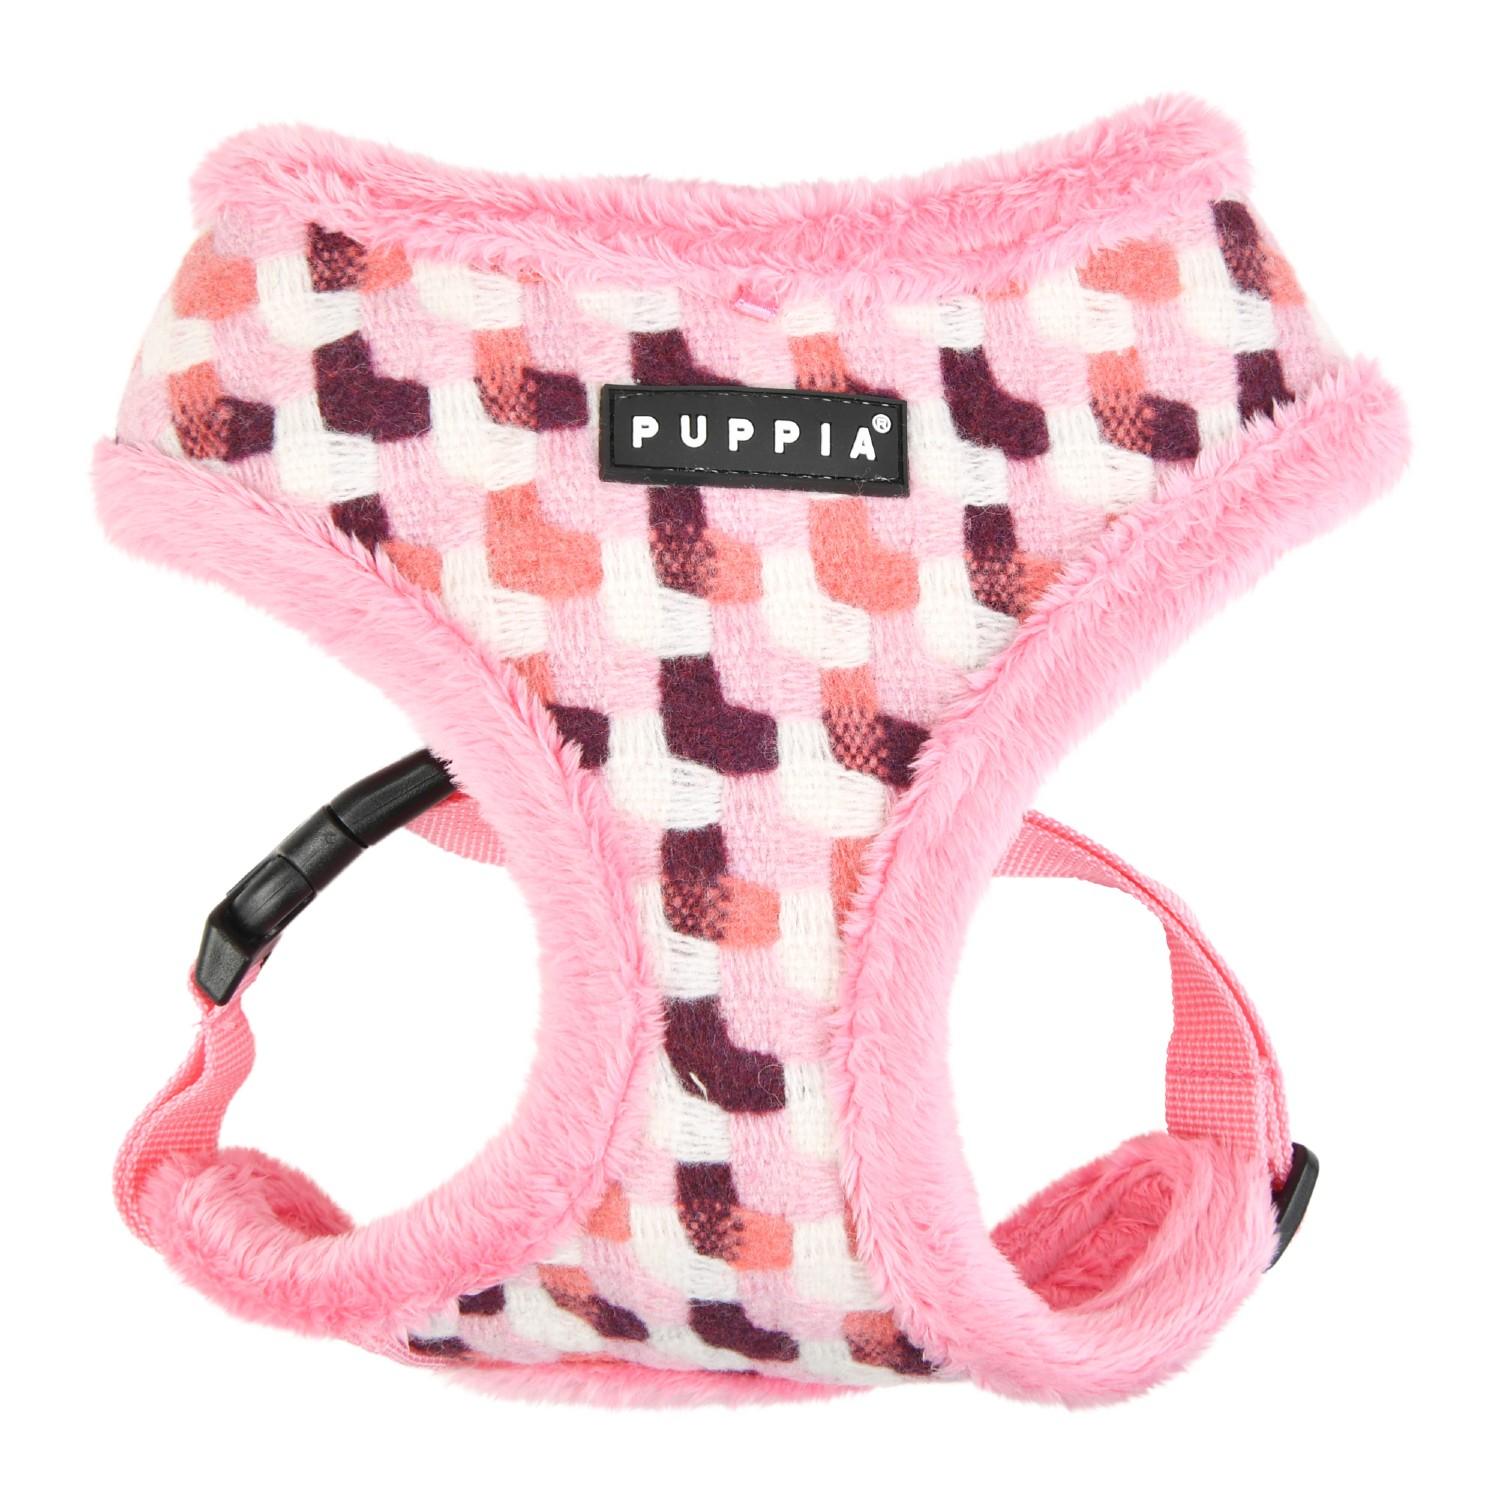 Arden Basic Style Dog Harness by Puppia - Pink